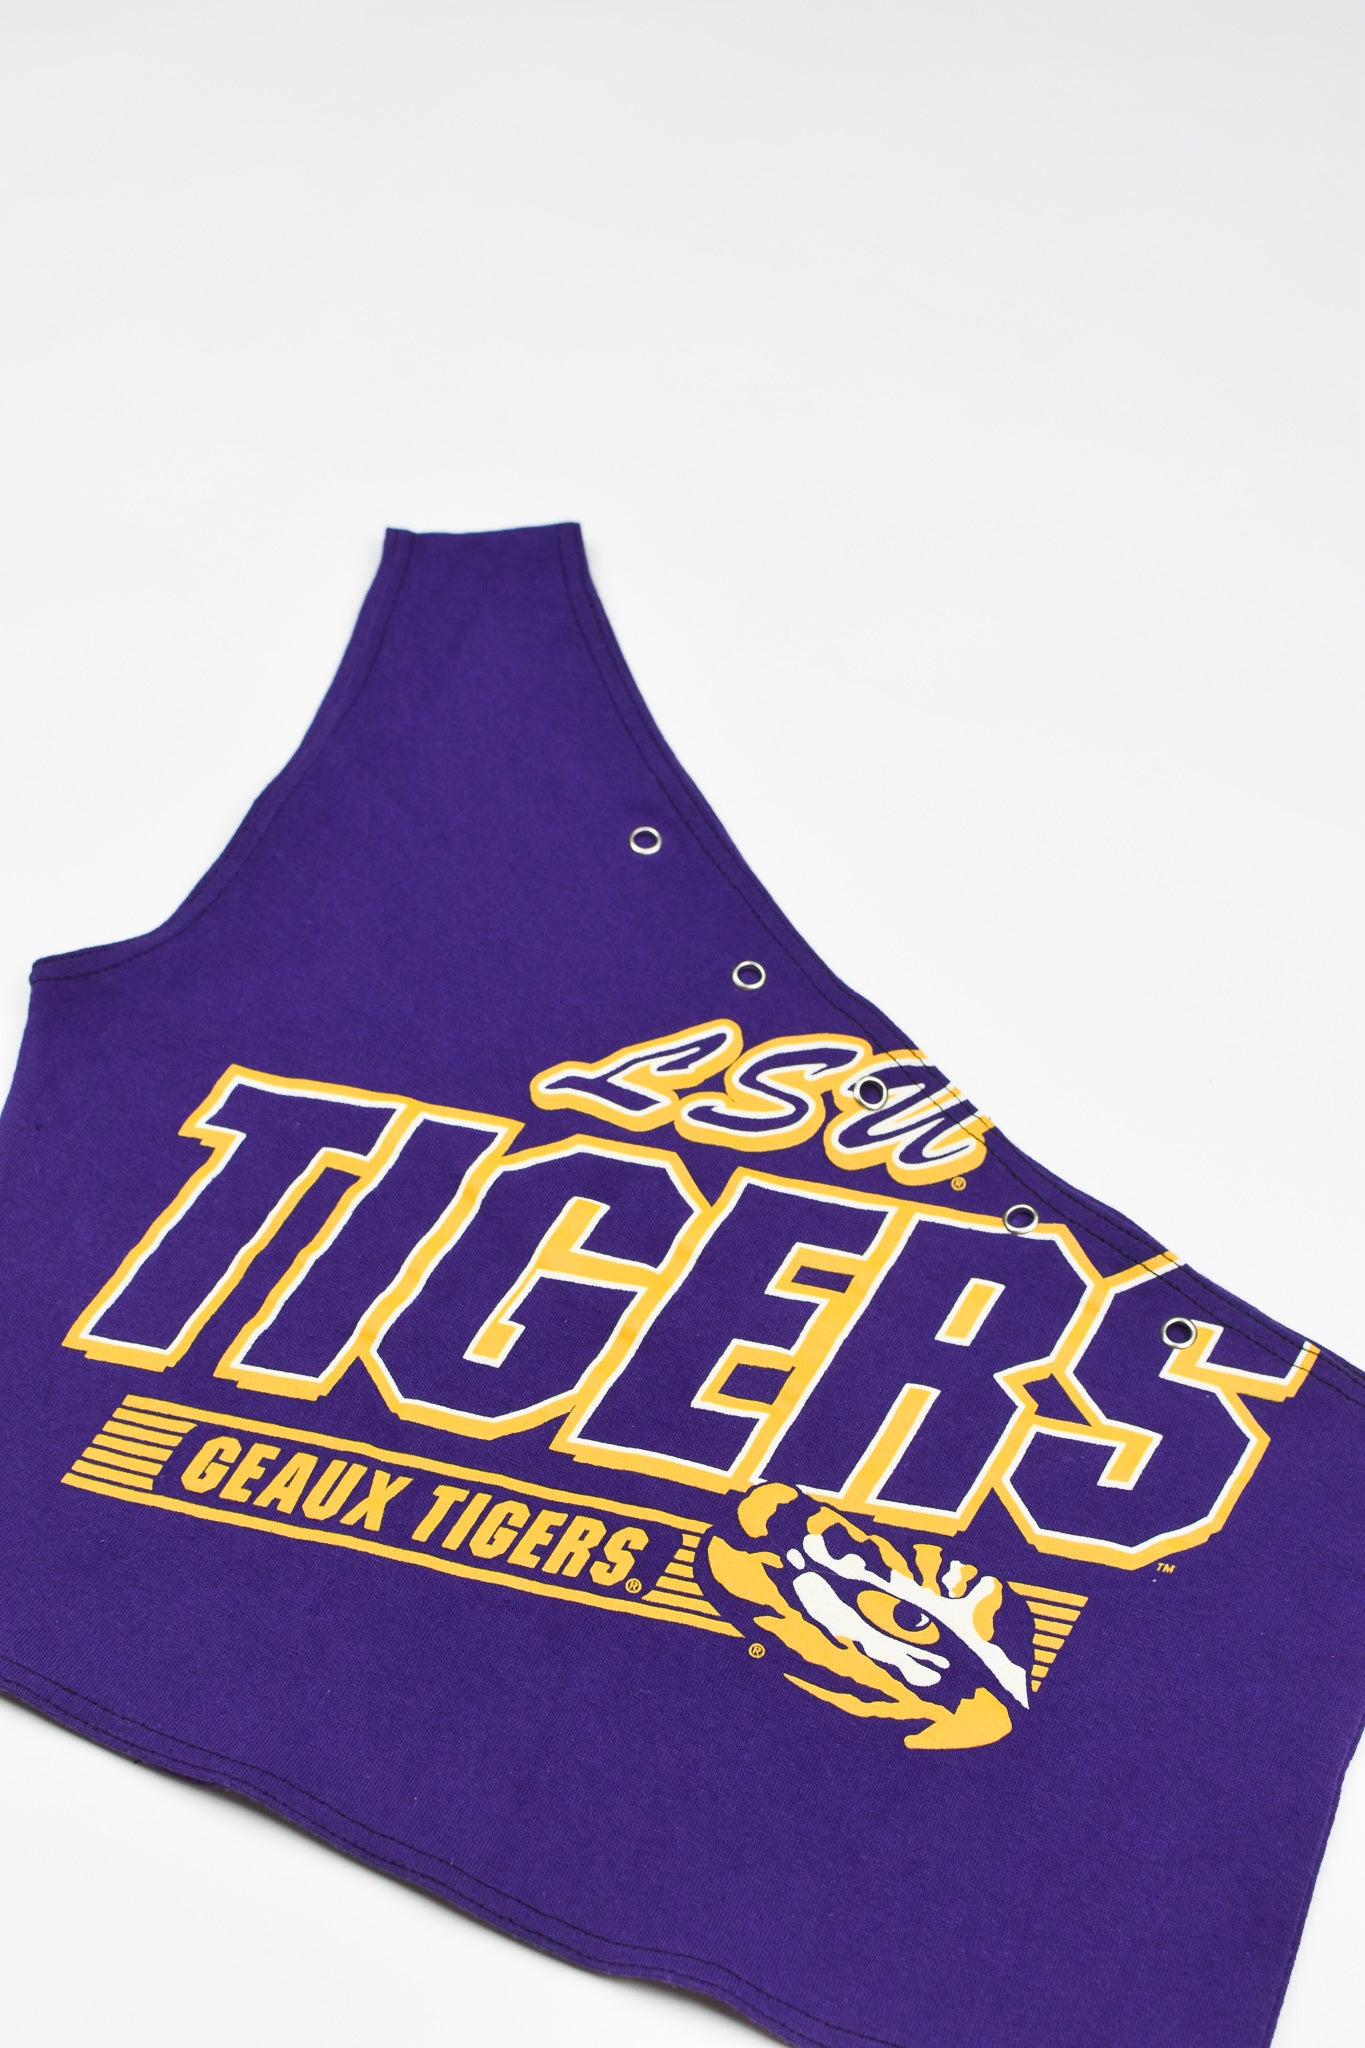 Upcycled LSU One Shoulder Tank Top